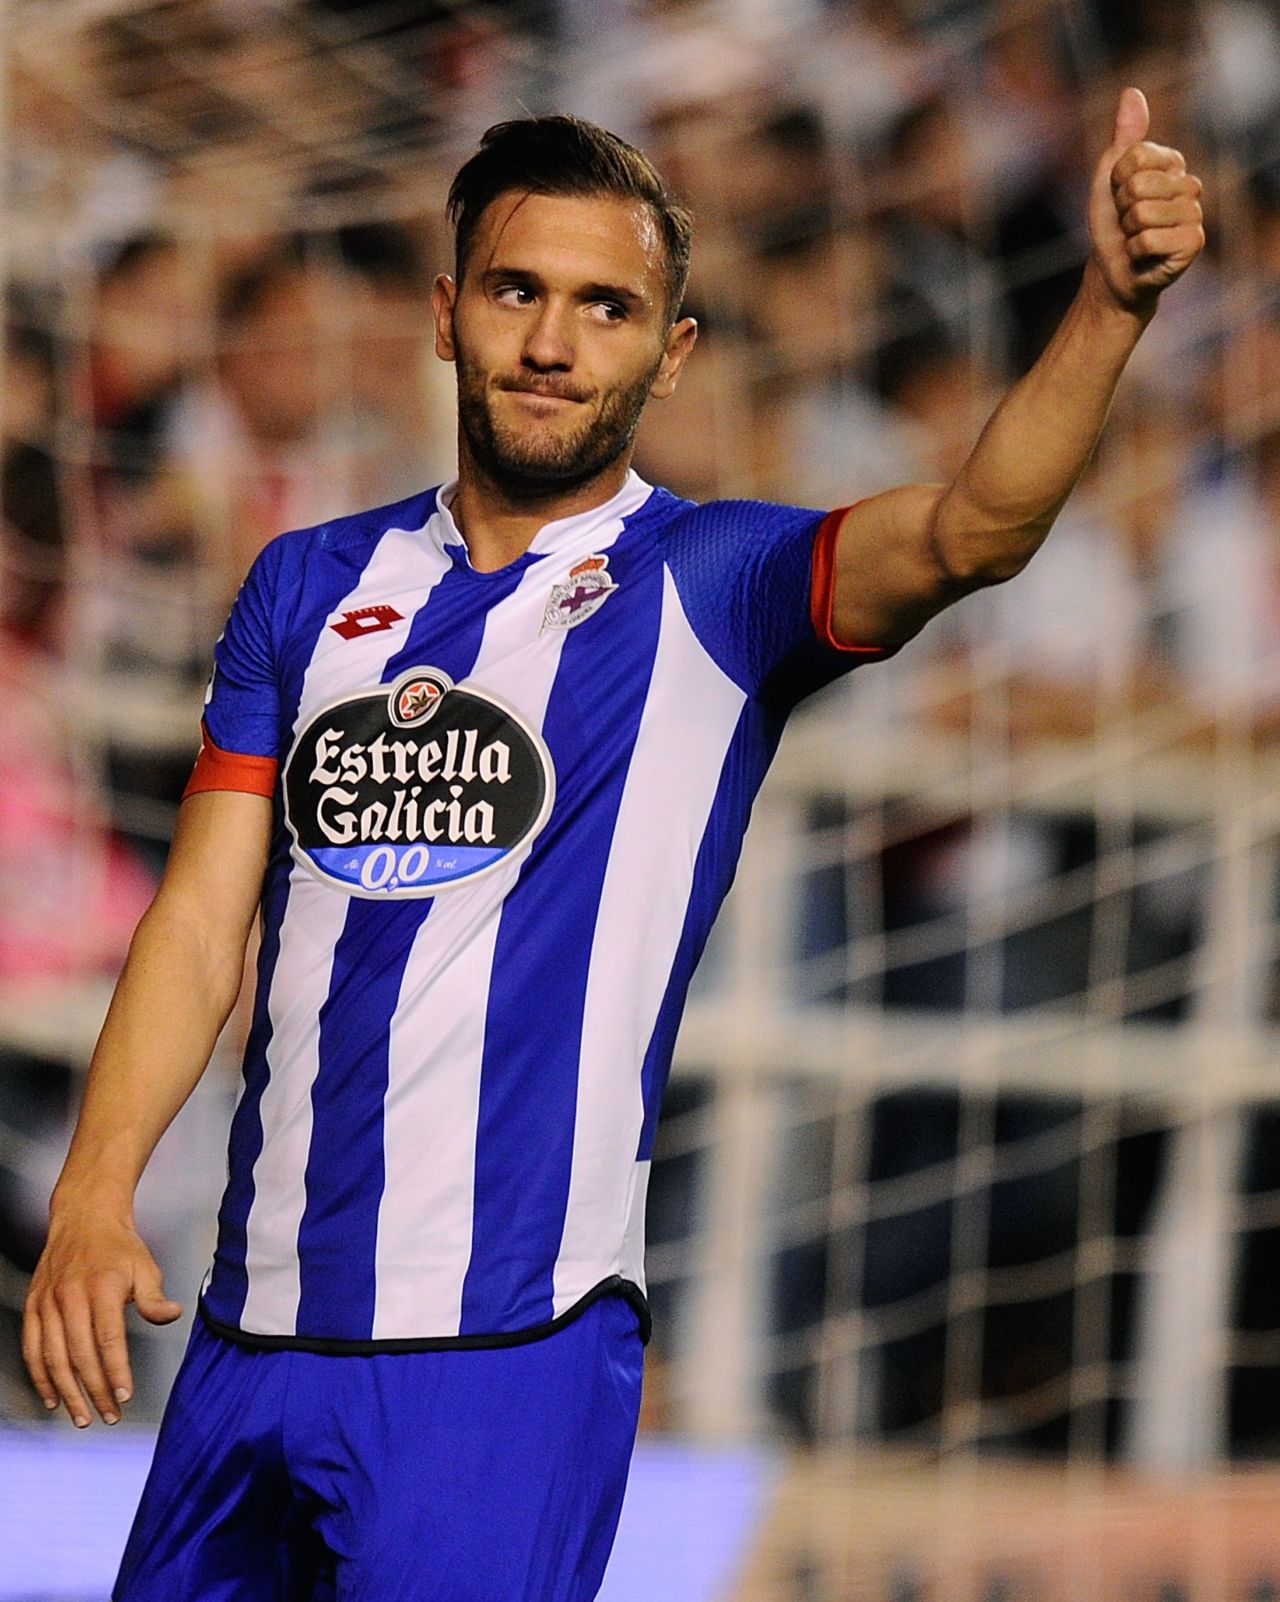 After failing to challenge for the Premier League title last season, Arsene Wenger was under pressure to further strengthen his squad with high-profile players -- but it took until August 30 for Arsenal to announce the signing of  Lucas Perez from Deportivo la Coruna for a reported fee of £17 million ($22 million). The 27-year-old is uncapped by Spain, but scored 17 goals in La Liga last season.